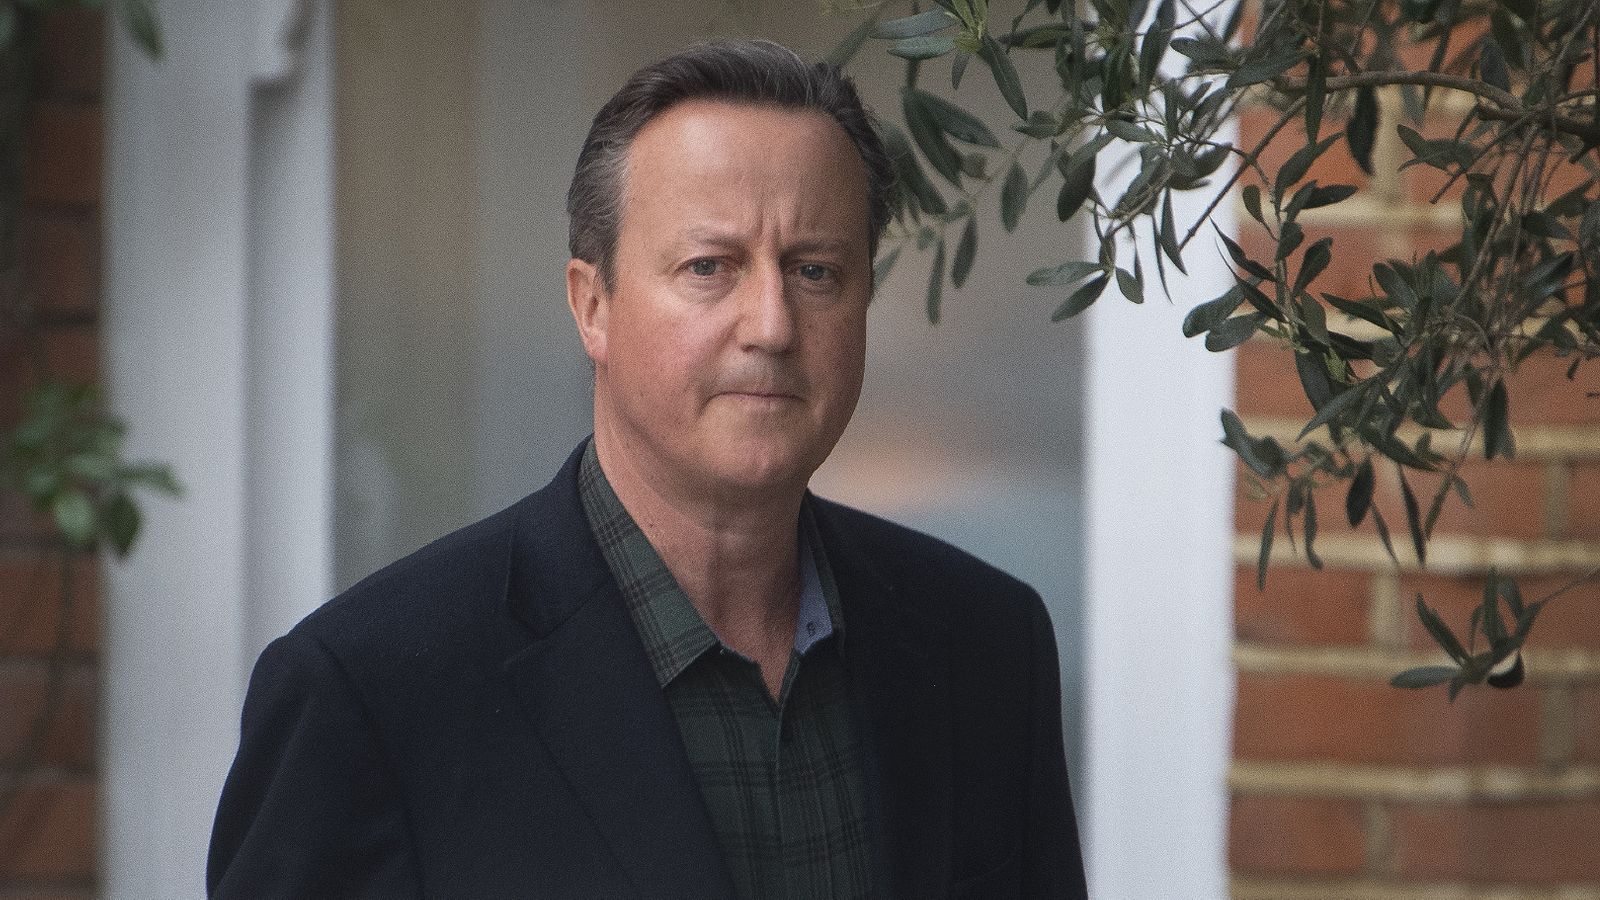 David Cameron quits Afiniti role after former employee's sex claims against software company founder Zia Chishti